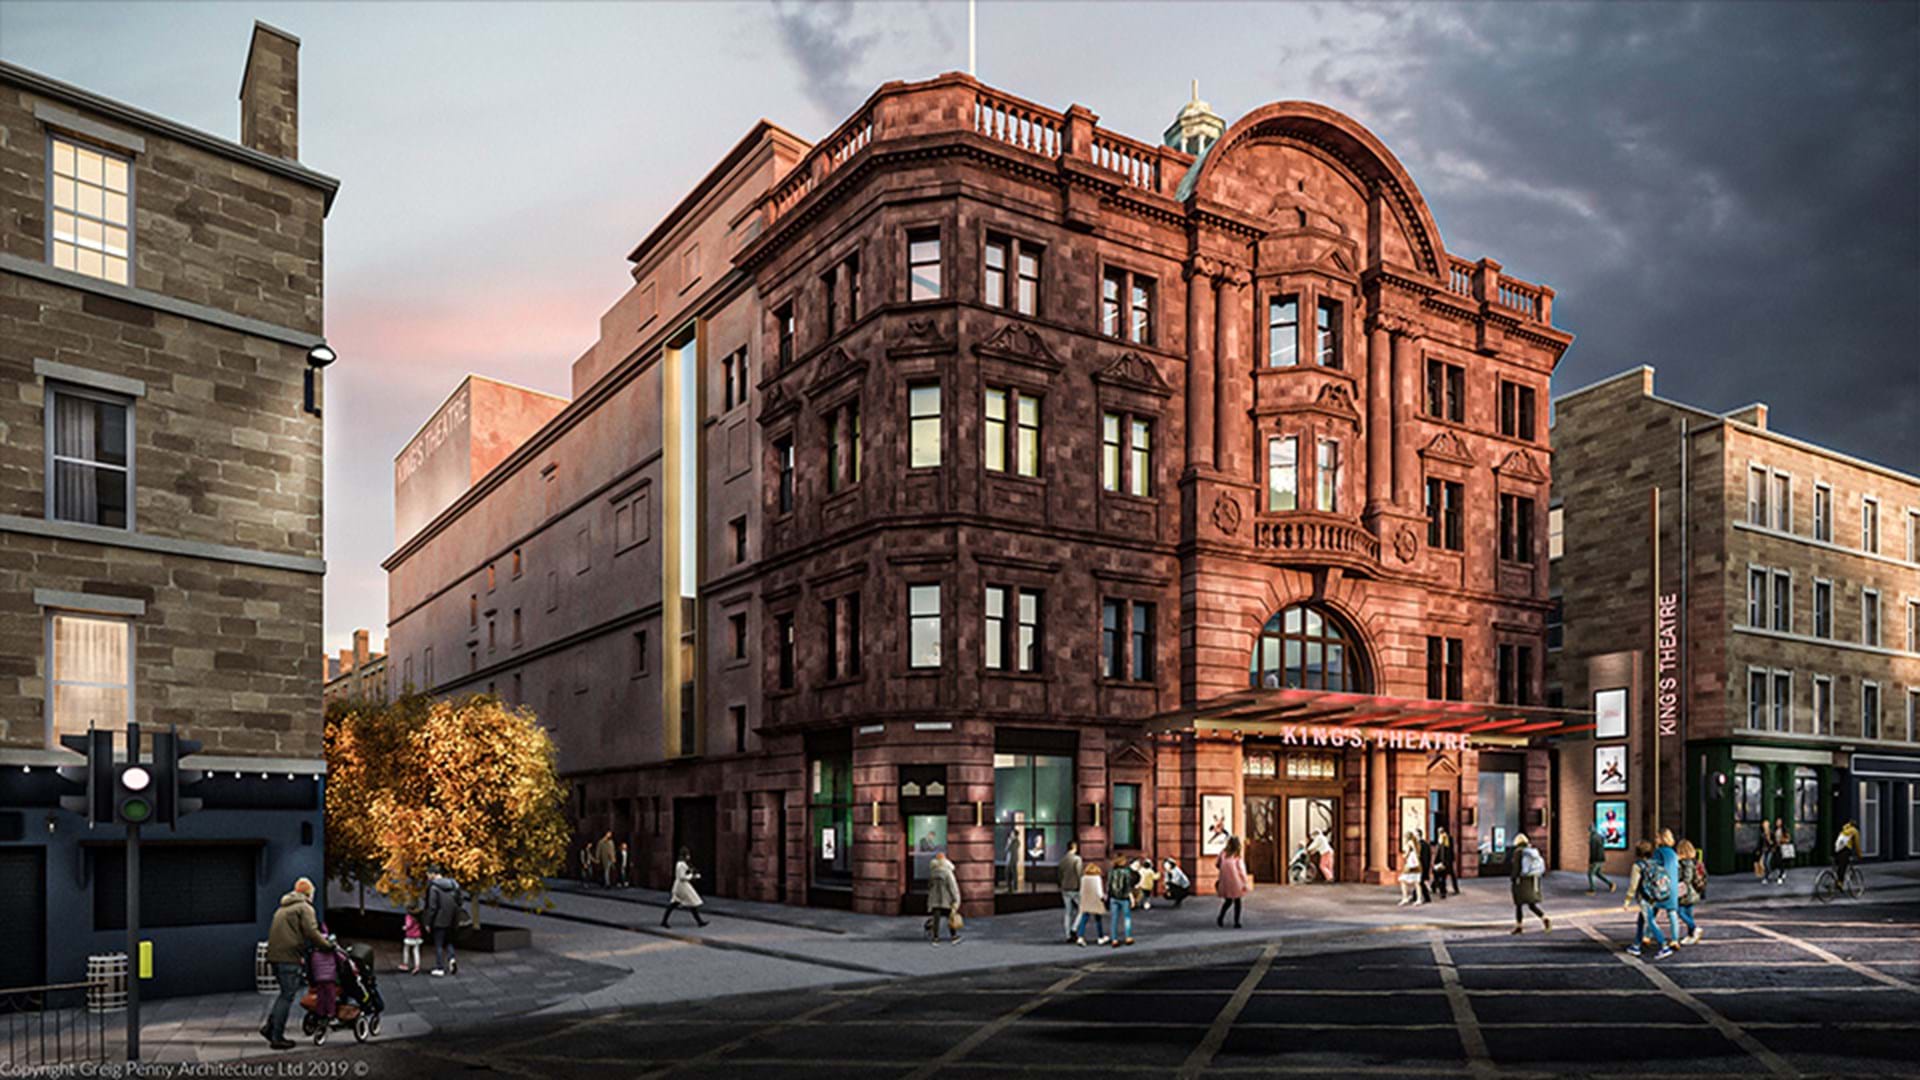 Edinburgh King’s Theatre redevelopment project calls for funding